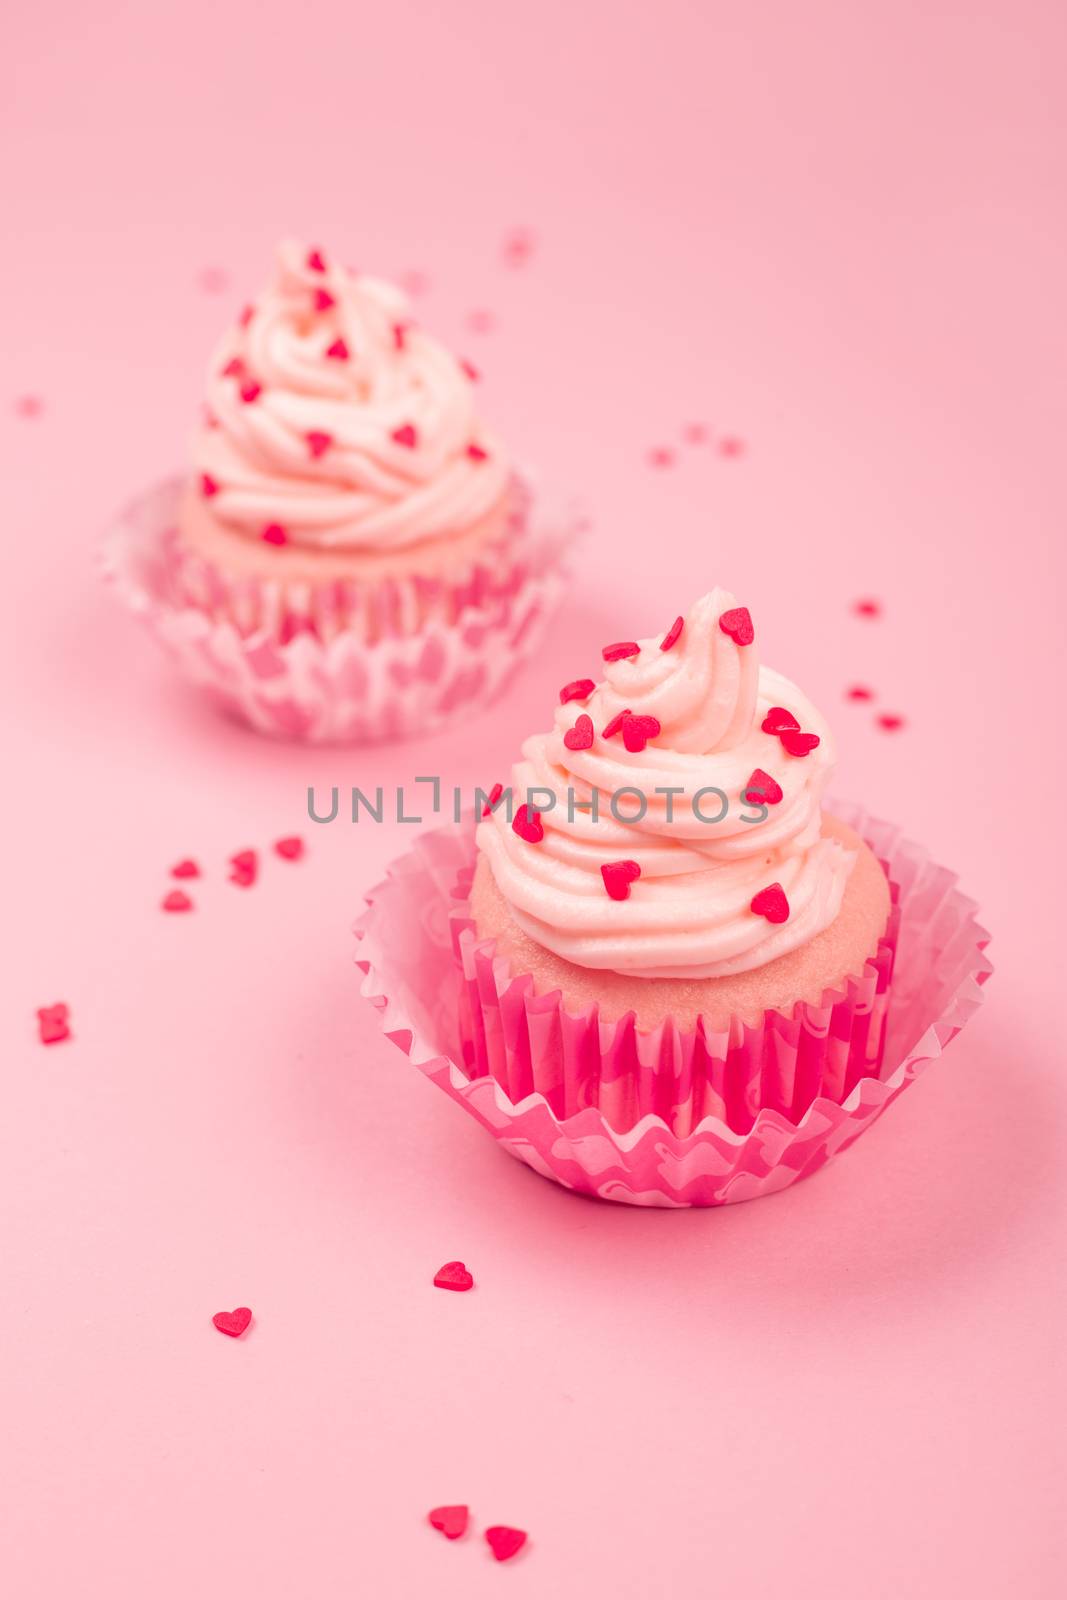 Valentine day two love cupcakes decorated with cream and hearts on pink background with copy space for text